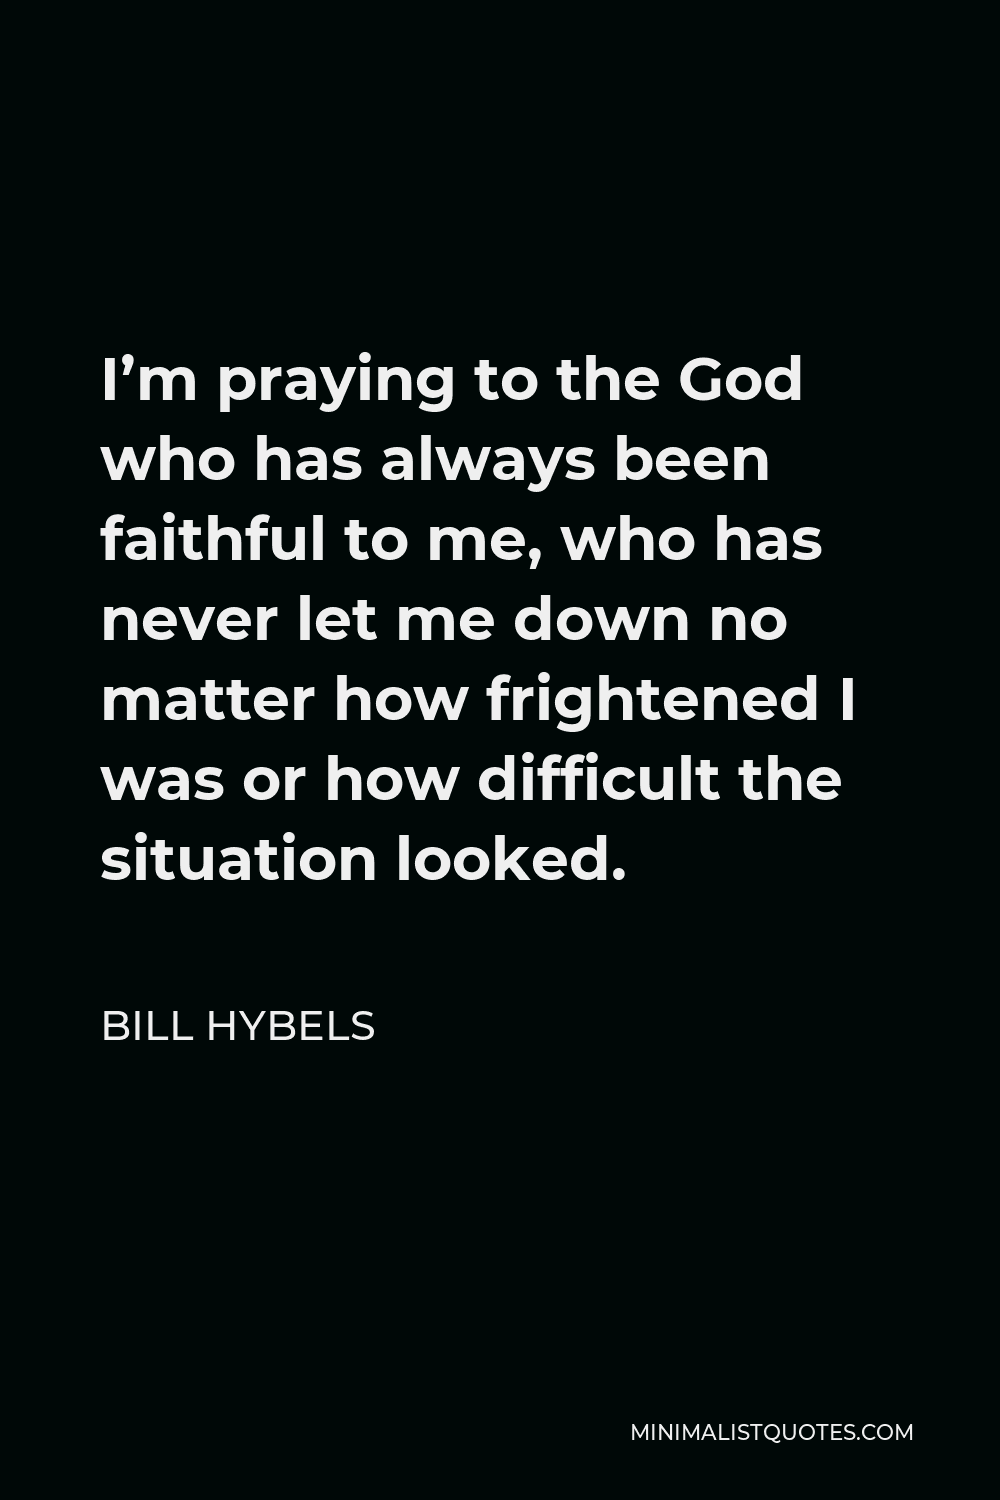 Bill Hybels Quote - I’m praying to the God who has always been faithful to me, who has never let me down no matter how frightened I was or how difficult the situation looked.